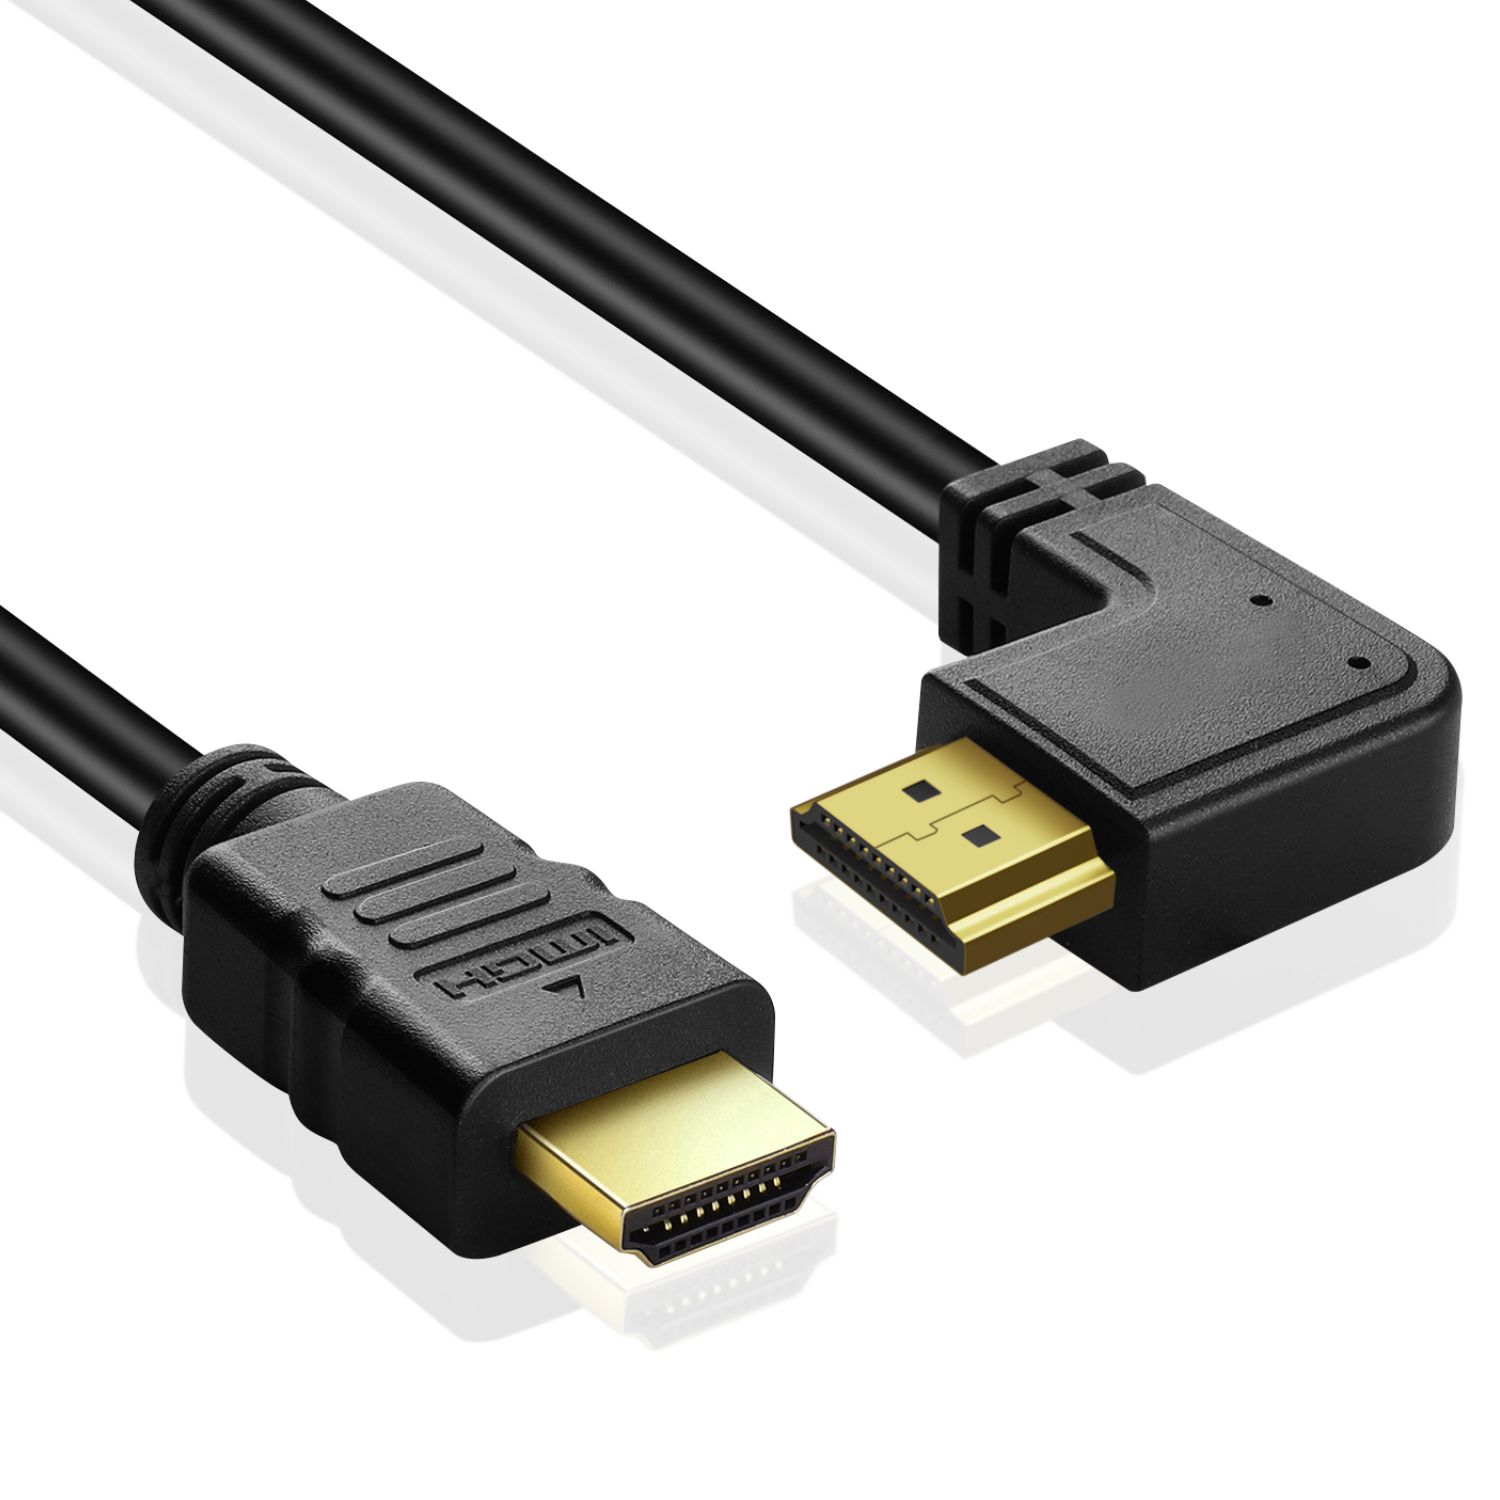 HDMI 2.0 Full Features - Supports all HDMI 2.0 features including Full HD, UHD, Audio Return Channel (ARC), HDMI Ethernet Channel (HEC), Dolby True HD 7.1 Audio, DTS-HD Master Audio, 3D, 48 Bit Deep Color, 32 channel Audio, HDCP and More